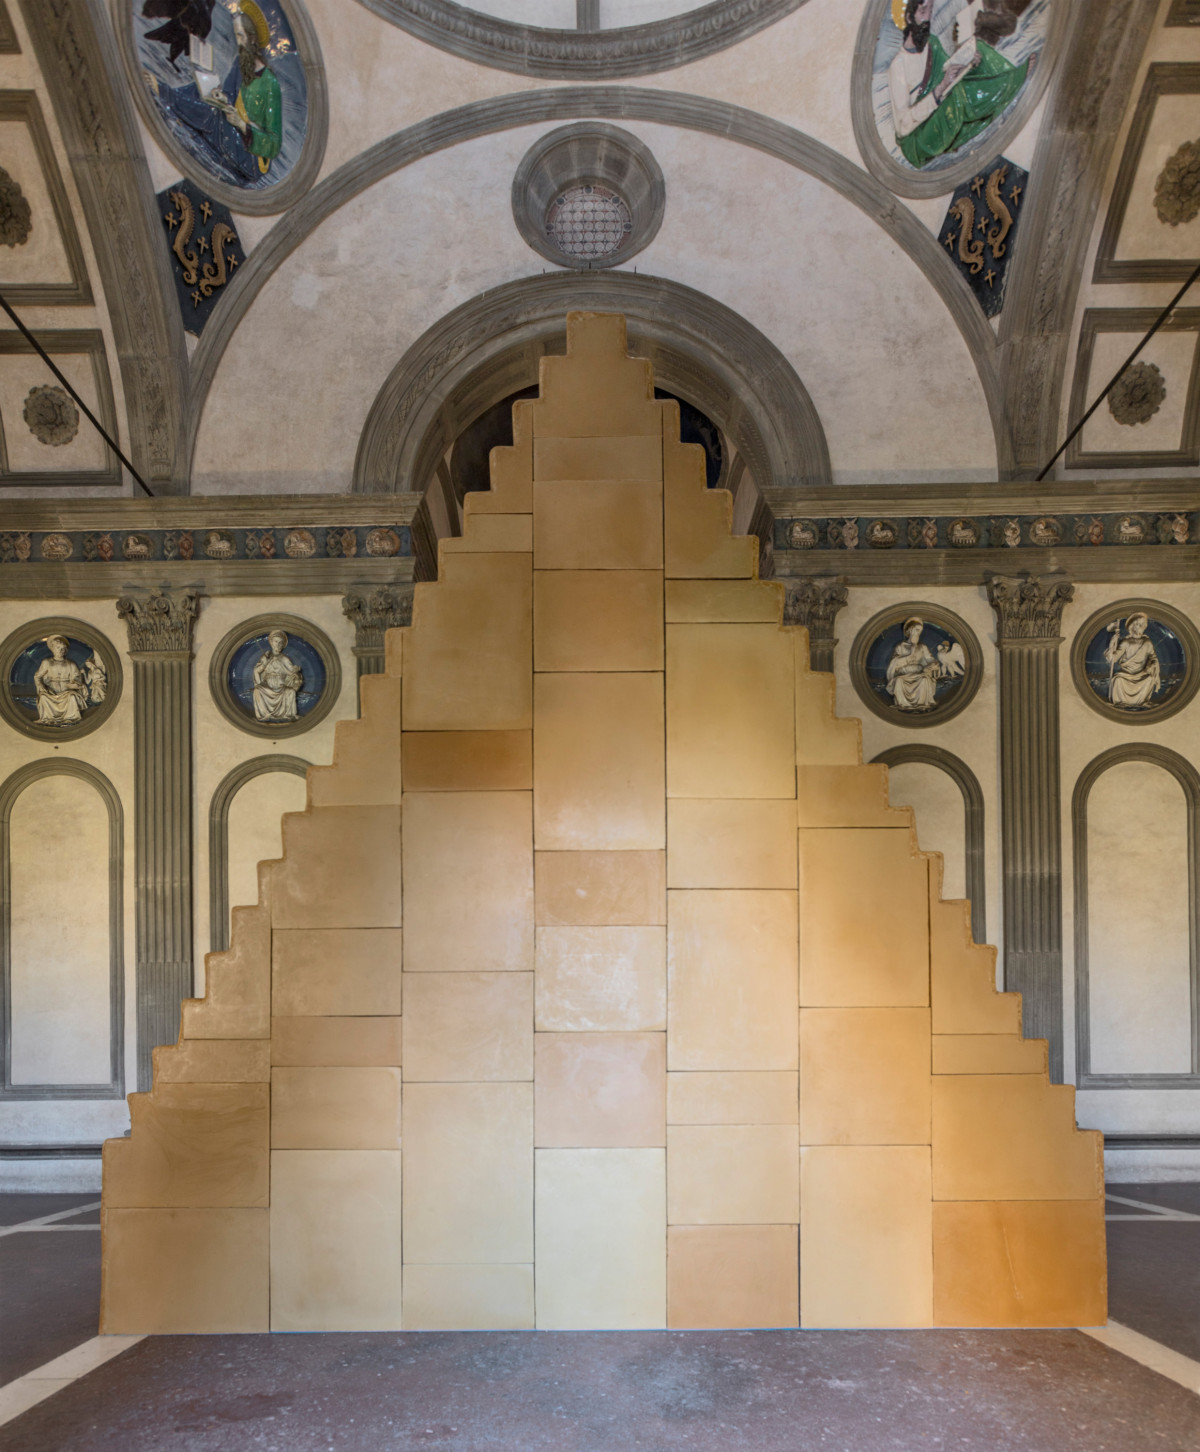 Wolfgang Laib, ‘Without Beginning and Without End ; in der Cappella Pazzi, Complesso Monumentale di Santa Croce, Florenz’, 2019, Bienenwachs